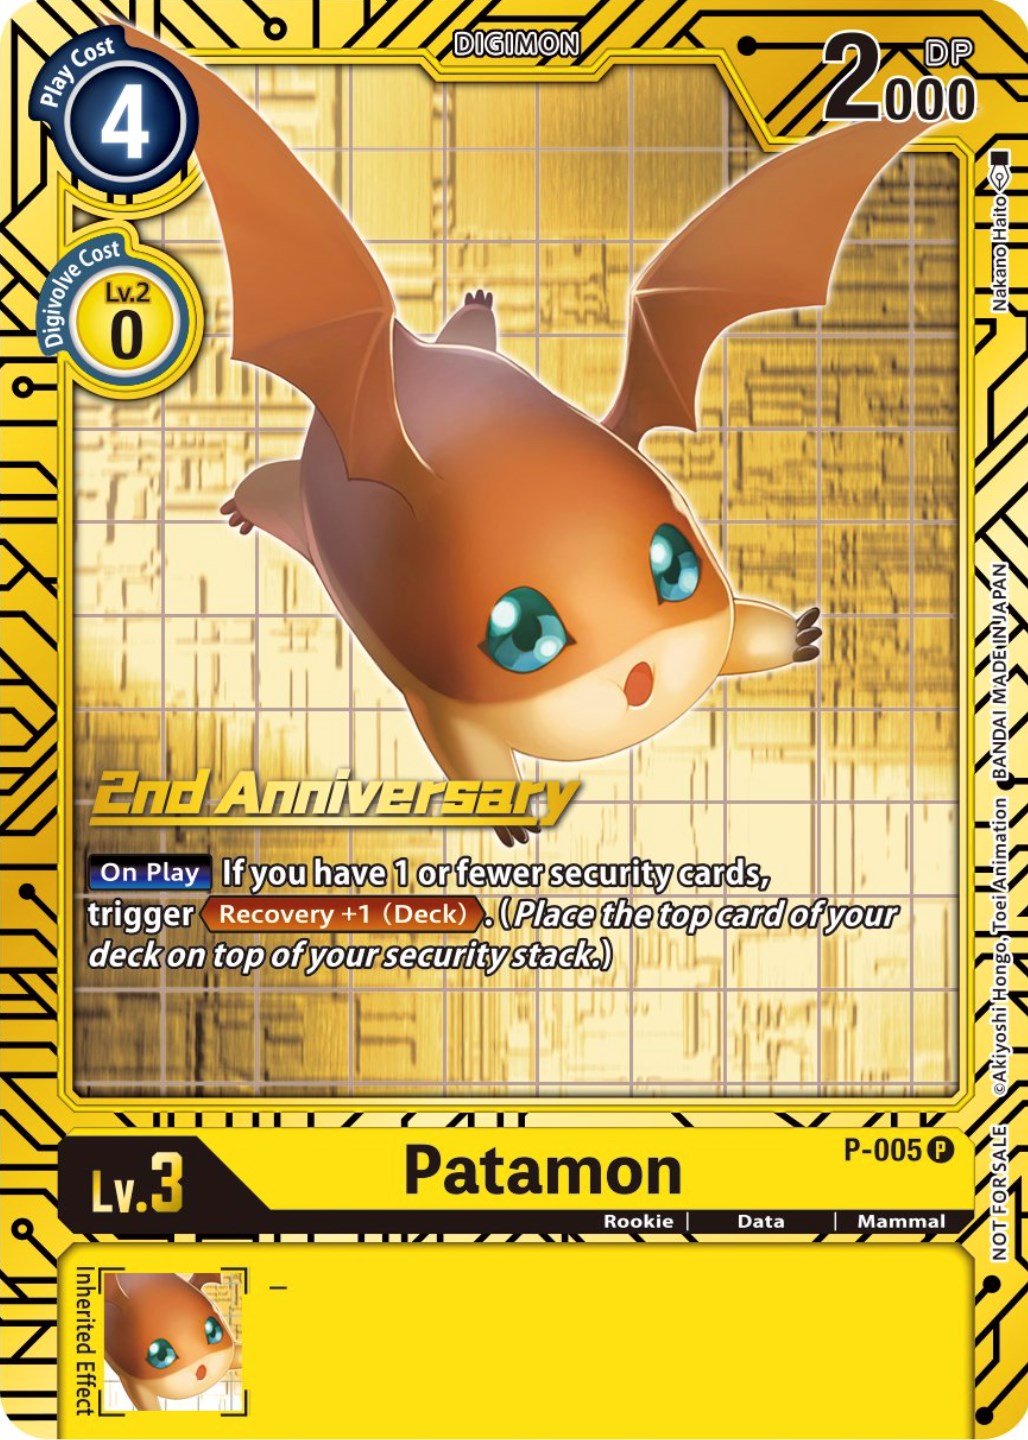 Patamon [P-005] (2nd Anniversary Card Set) [Promotional Cards] | Total Play